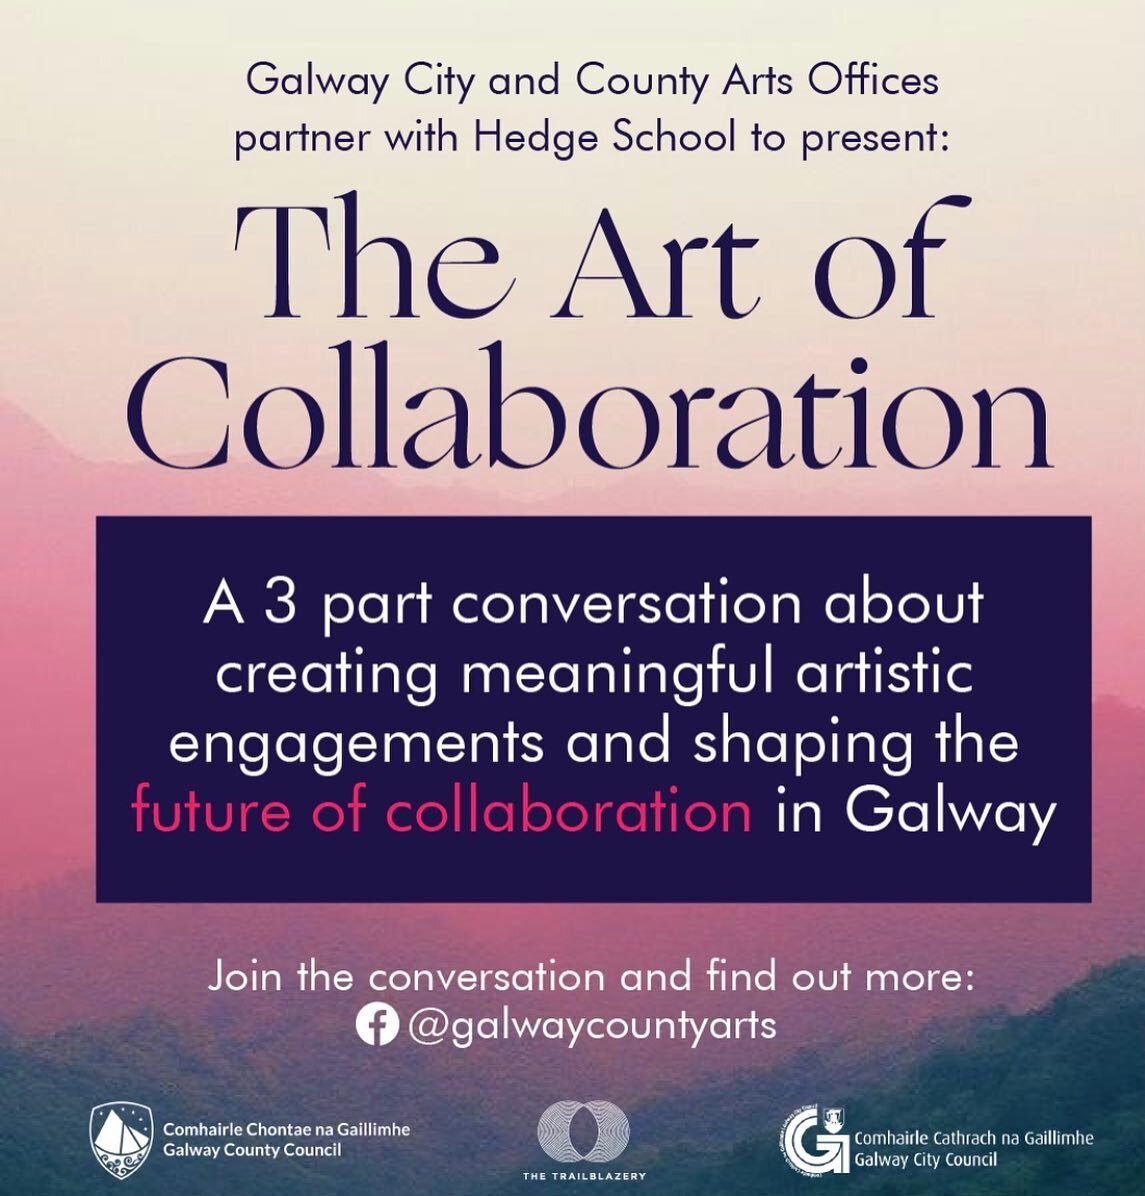 We are delighted to partner with 
Galway County Arts Office and City Arts Offices to present:
THE ART OF COLLABORATION
A 3-part conversation on Creating Meaningful Engagements and shaping the future of collaboration in Galway. We are inviting artists